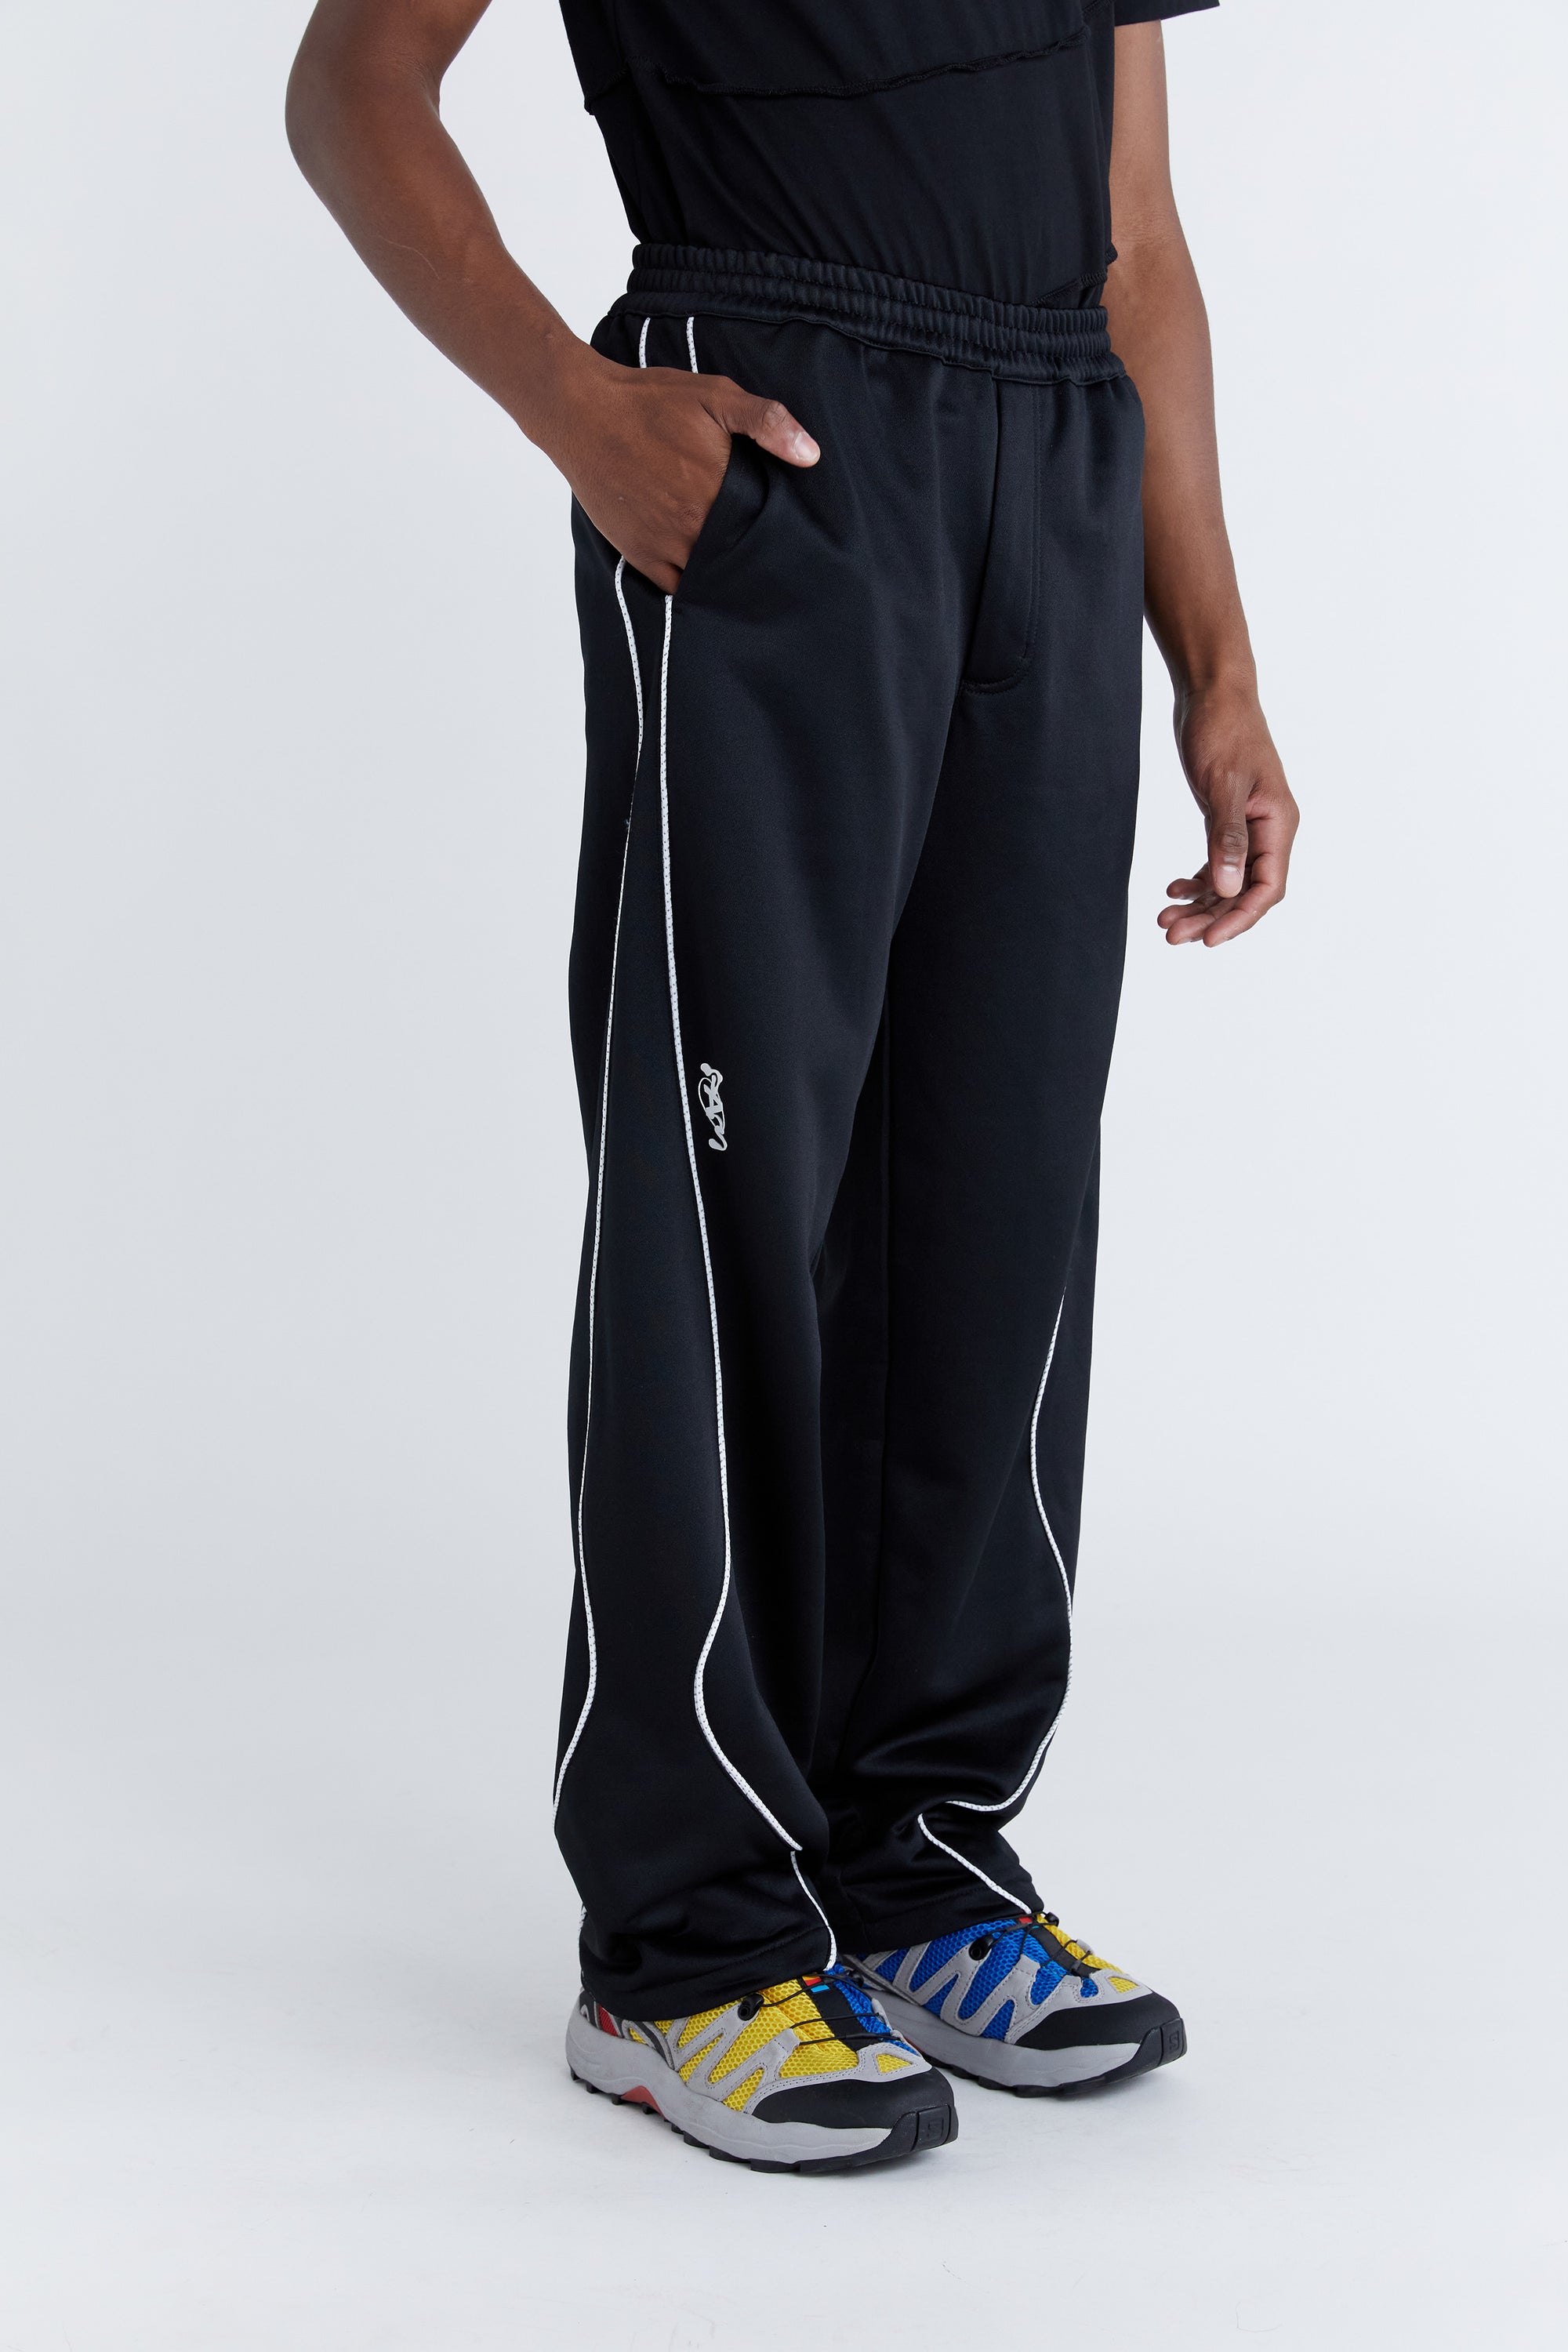 P.A.M (Perks and Mini) Straight Leg Track Pant in Black